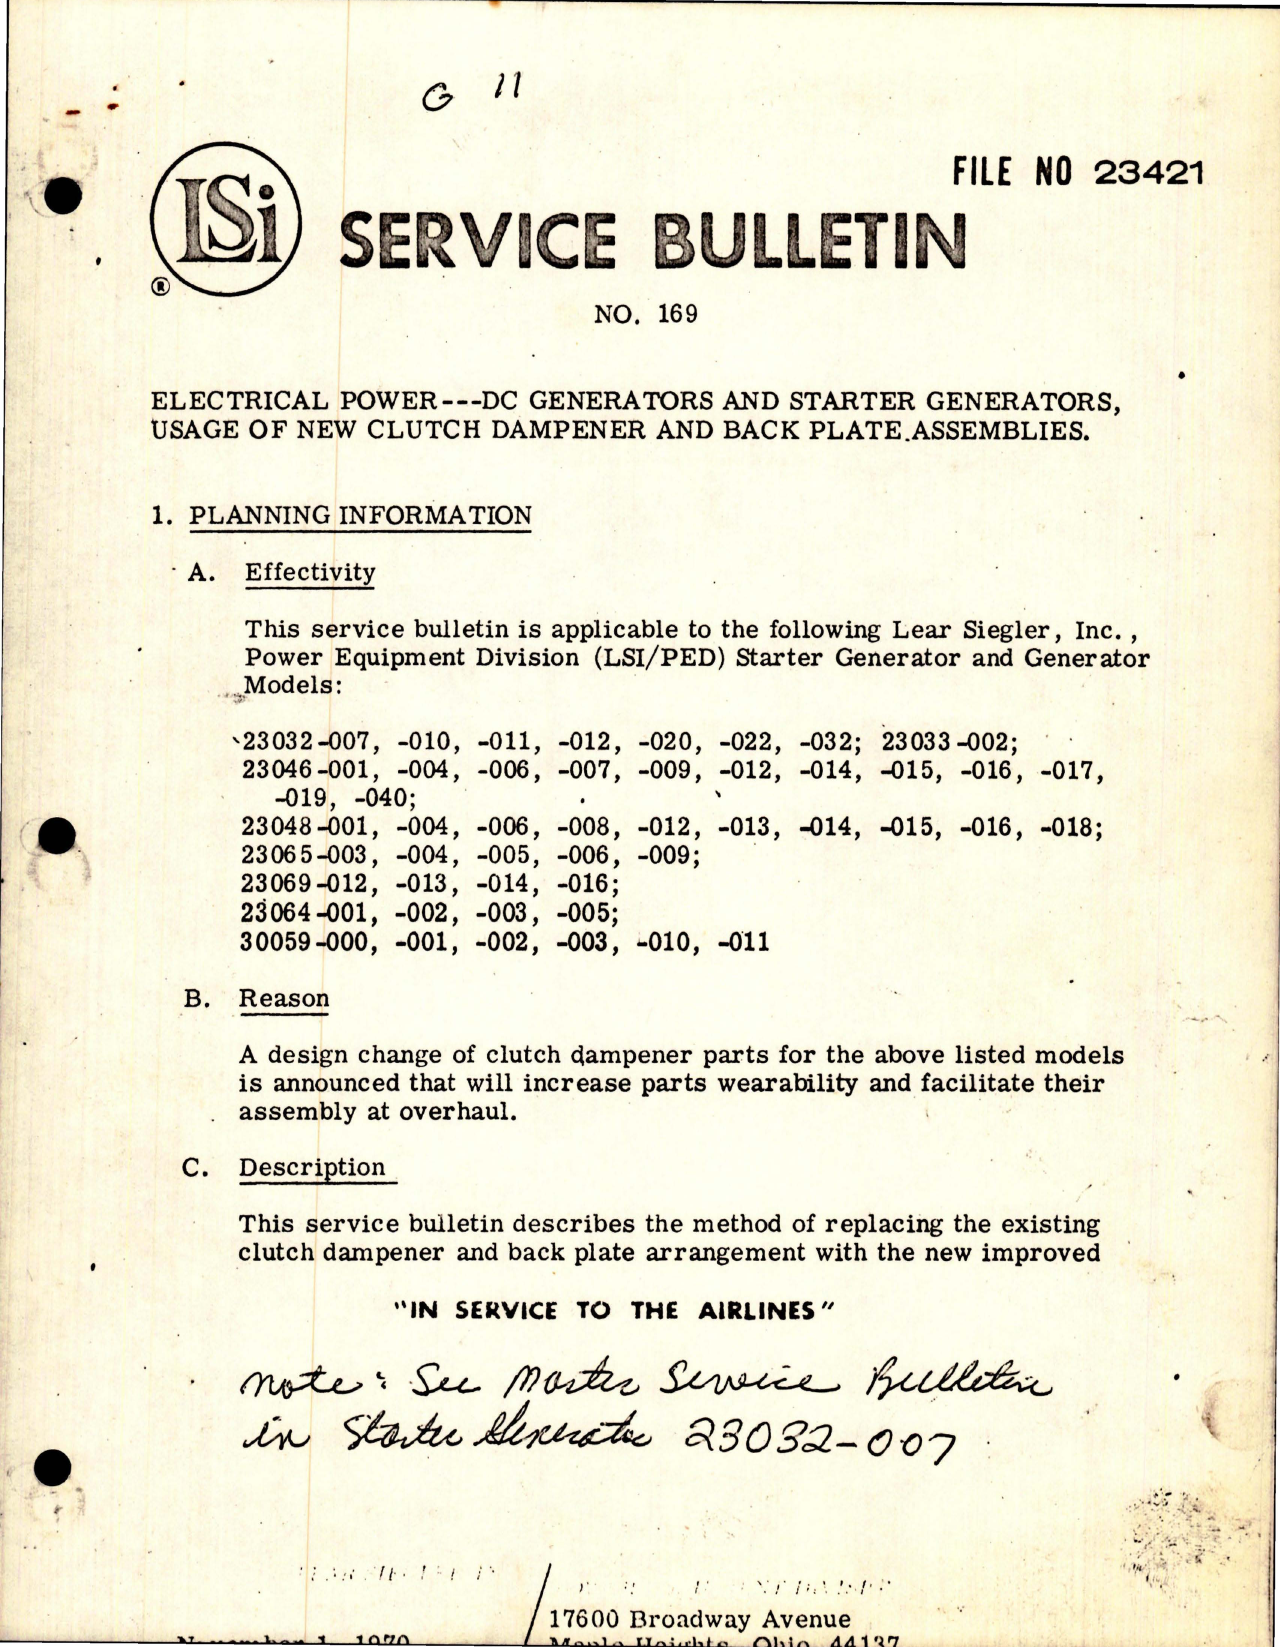 Sample page 1 from AirCorps Library document: Service Bulletin No. 169 for DC Generators and DC Starter Generators - Usage of New Clutch Dampener and Back Plate Assemblies